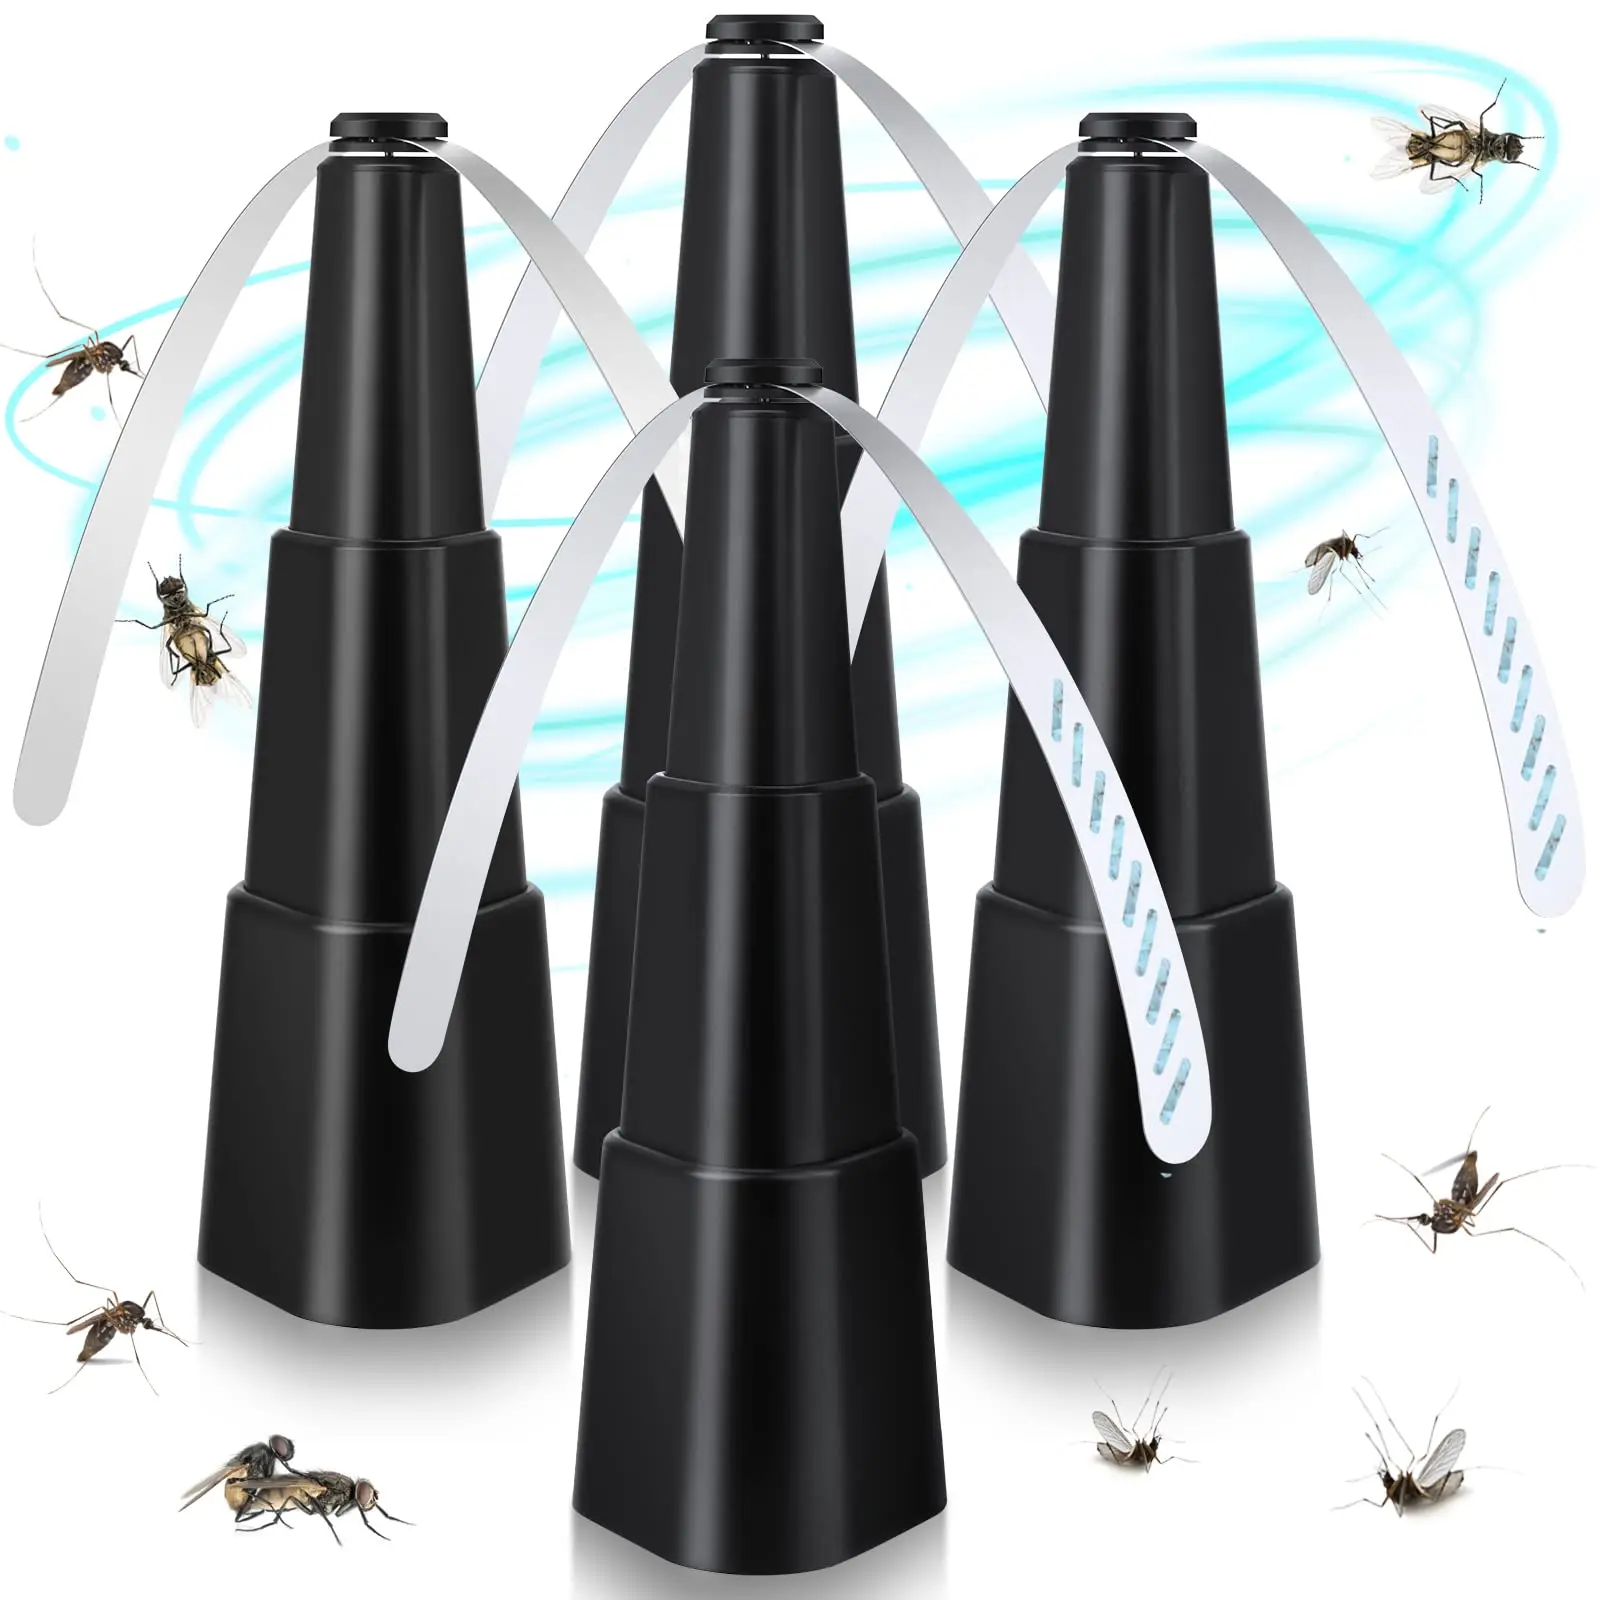 Fly Fans for Tables Fly Repellent Fan Indoor Outdoor with Holographic Blades Keep Flies Away Bug Repellent Outdoor multifunctional fan blade automatic fly repellent desktop for summer protector insect fan home outdoor picnic repellent kit z3i7